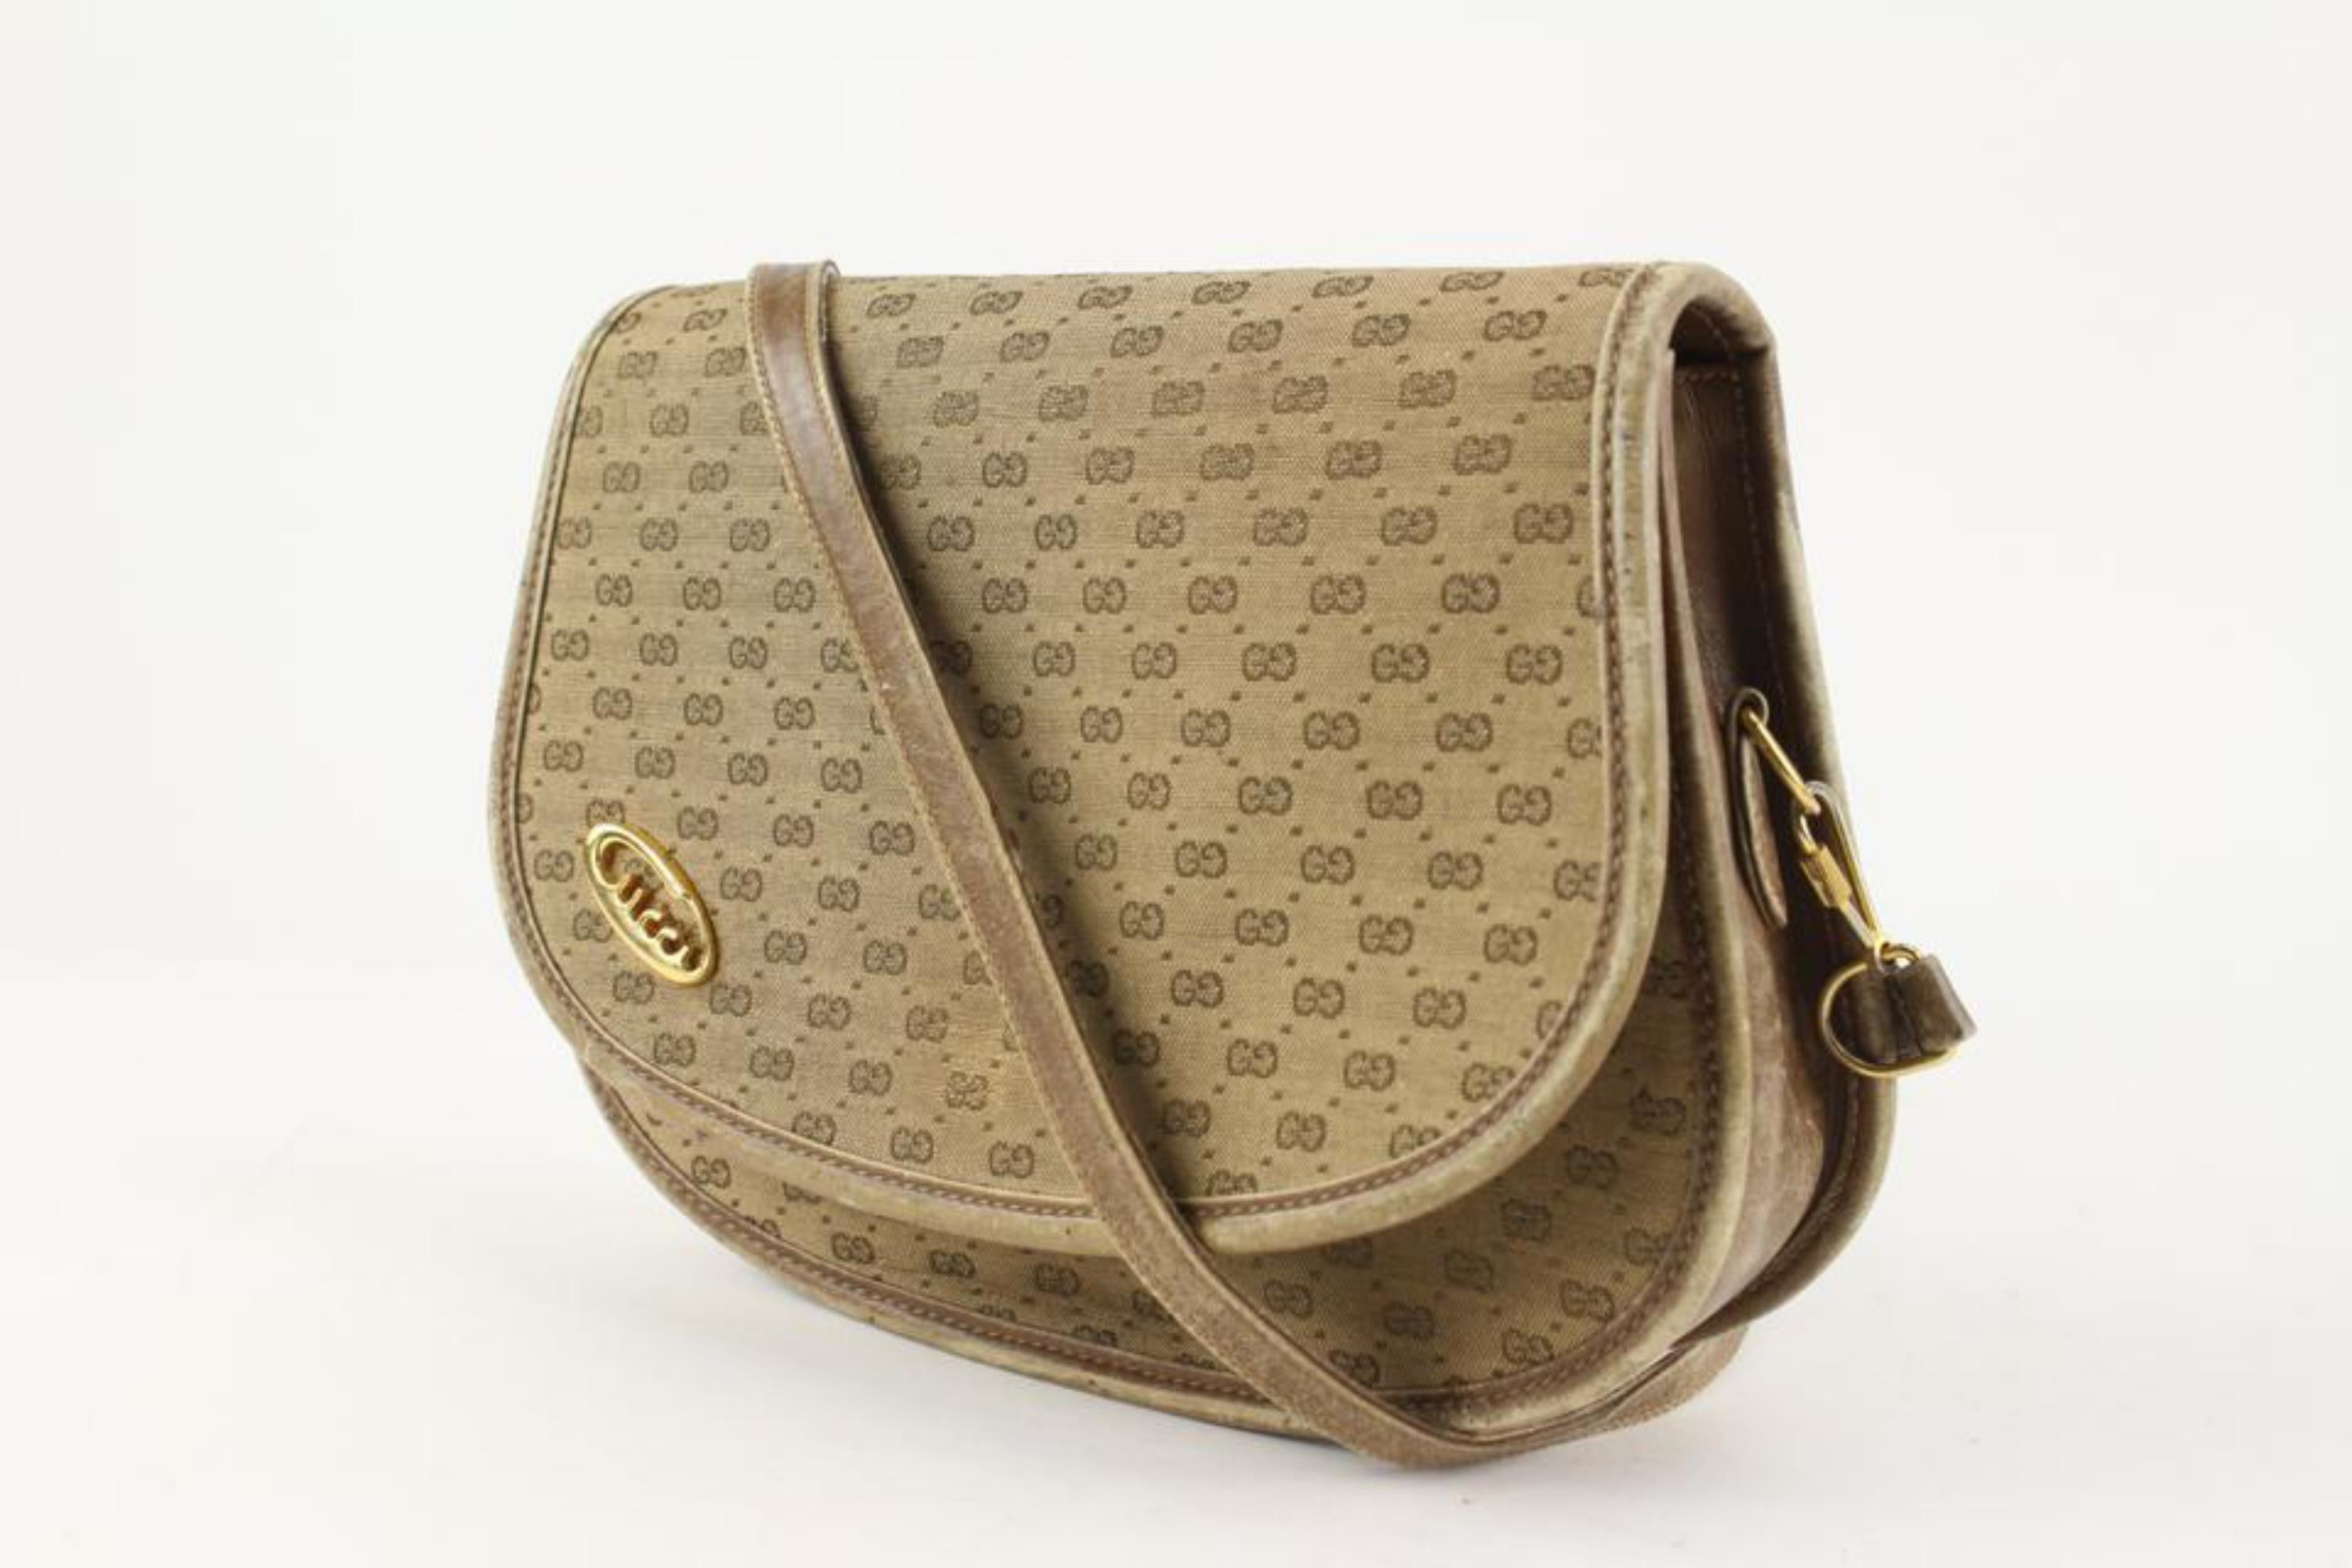 Gucci Beige Monogram Micro GG Crossbody Flap Bag 1216g1
Made In: Italy
Measurements: Length:  8.5